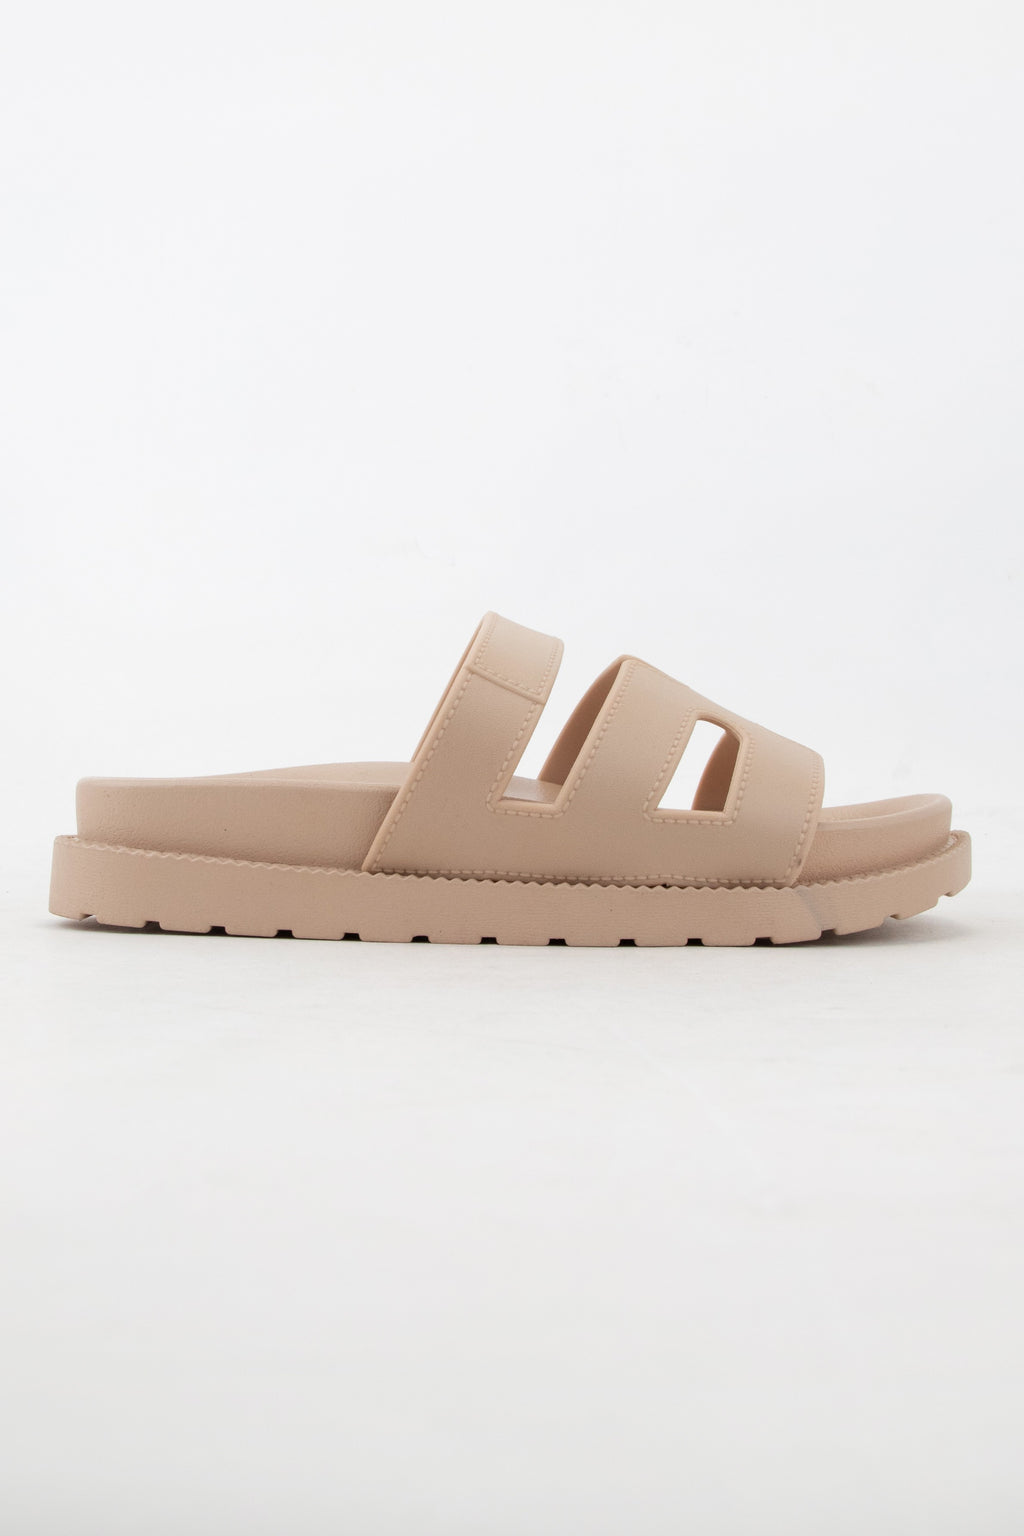 Cut It Out Slip On Sandals